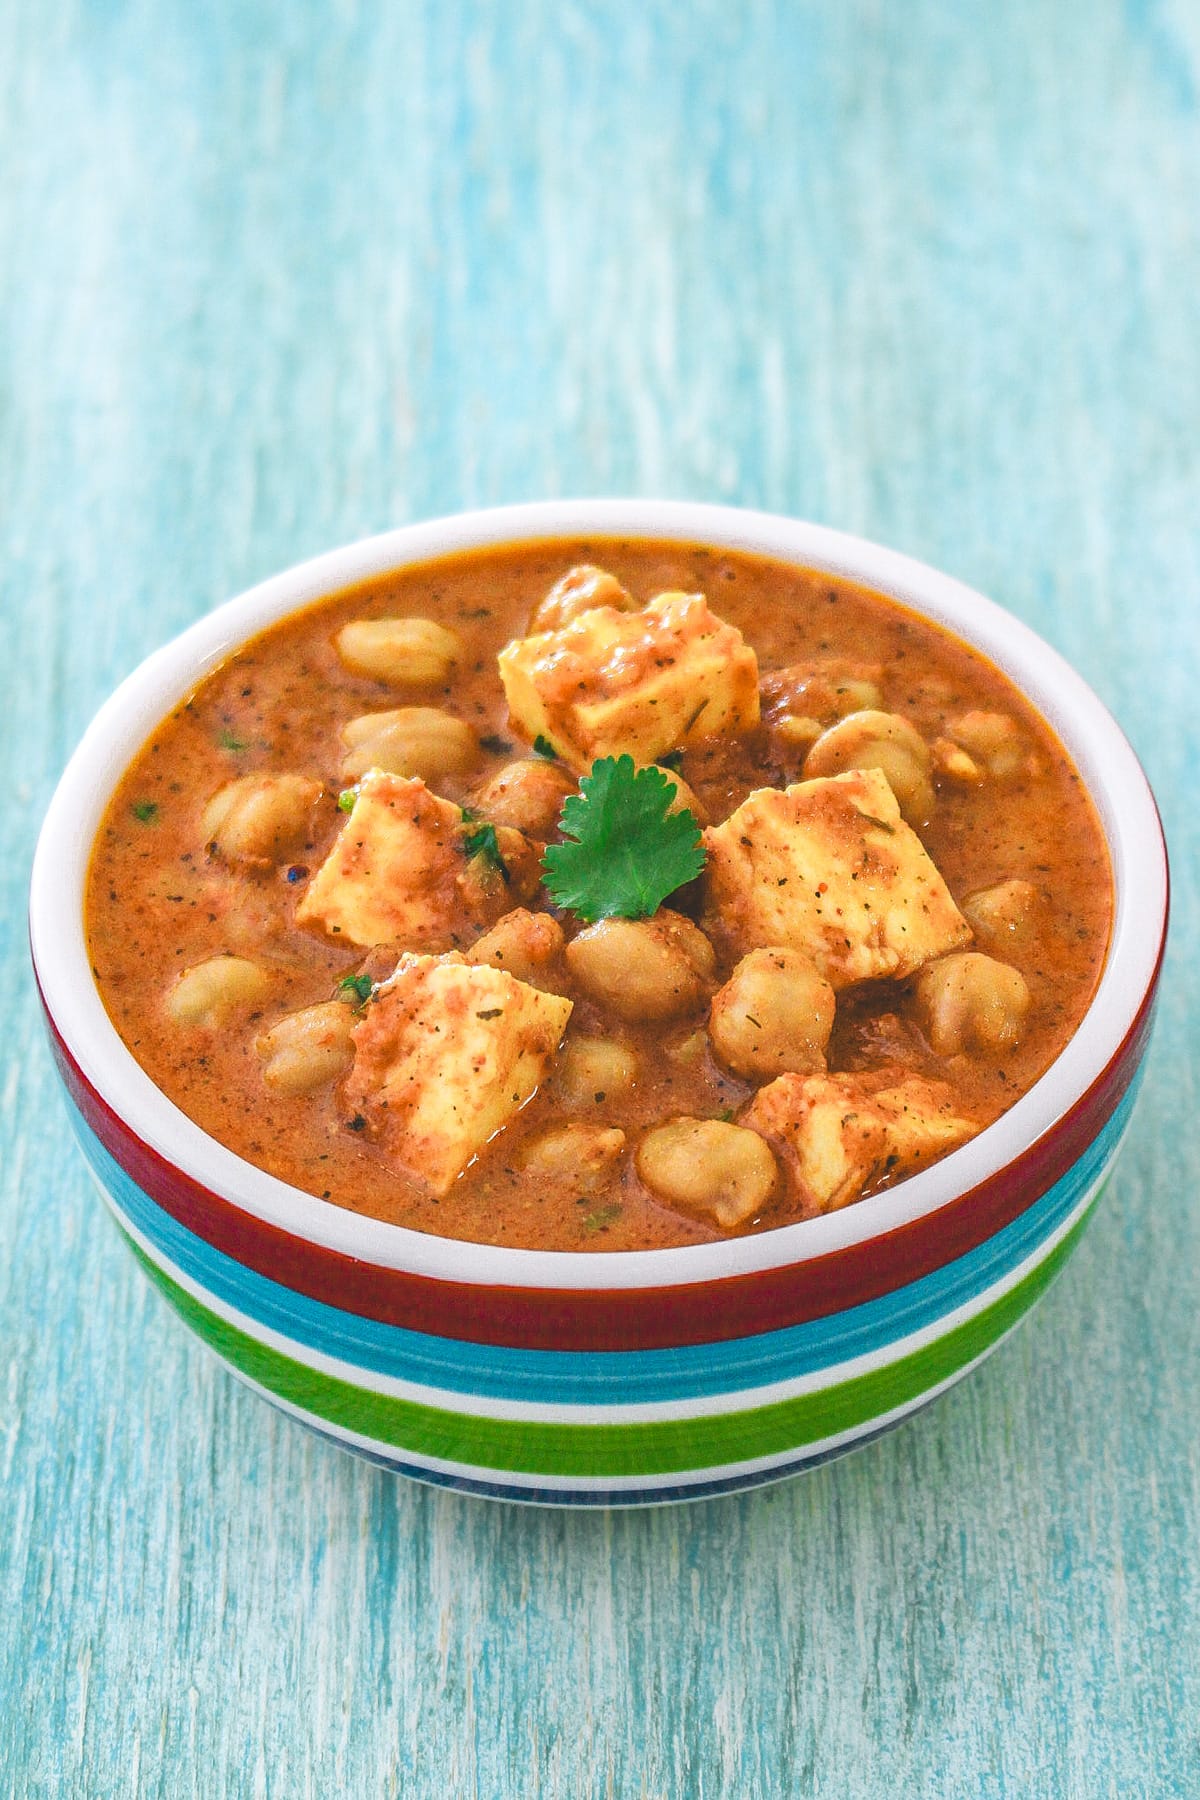 Chana paneer in a bowl and garnished with cilantro.